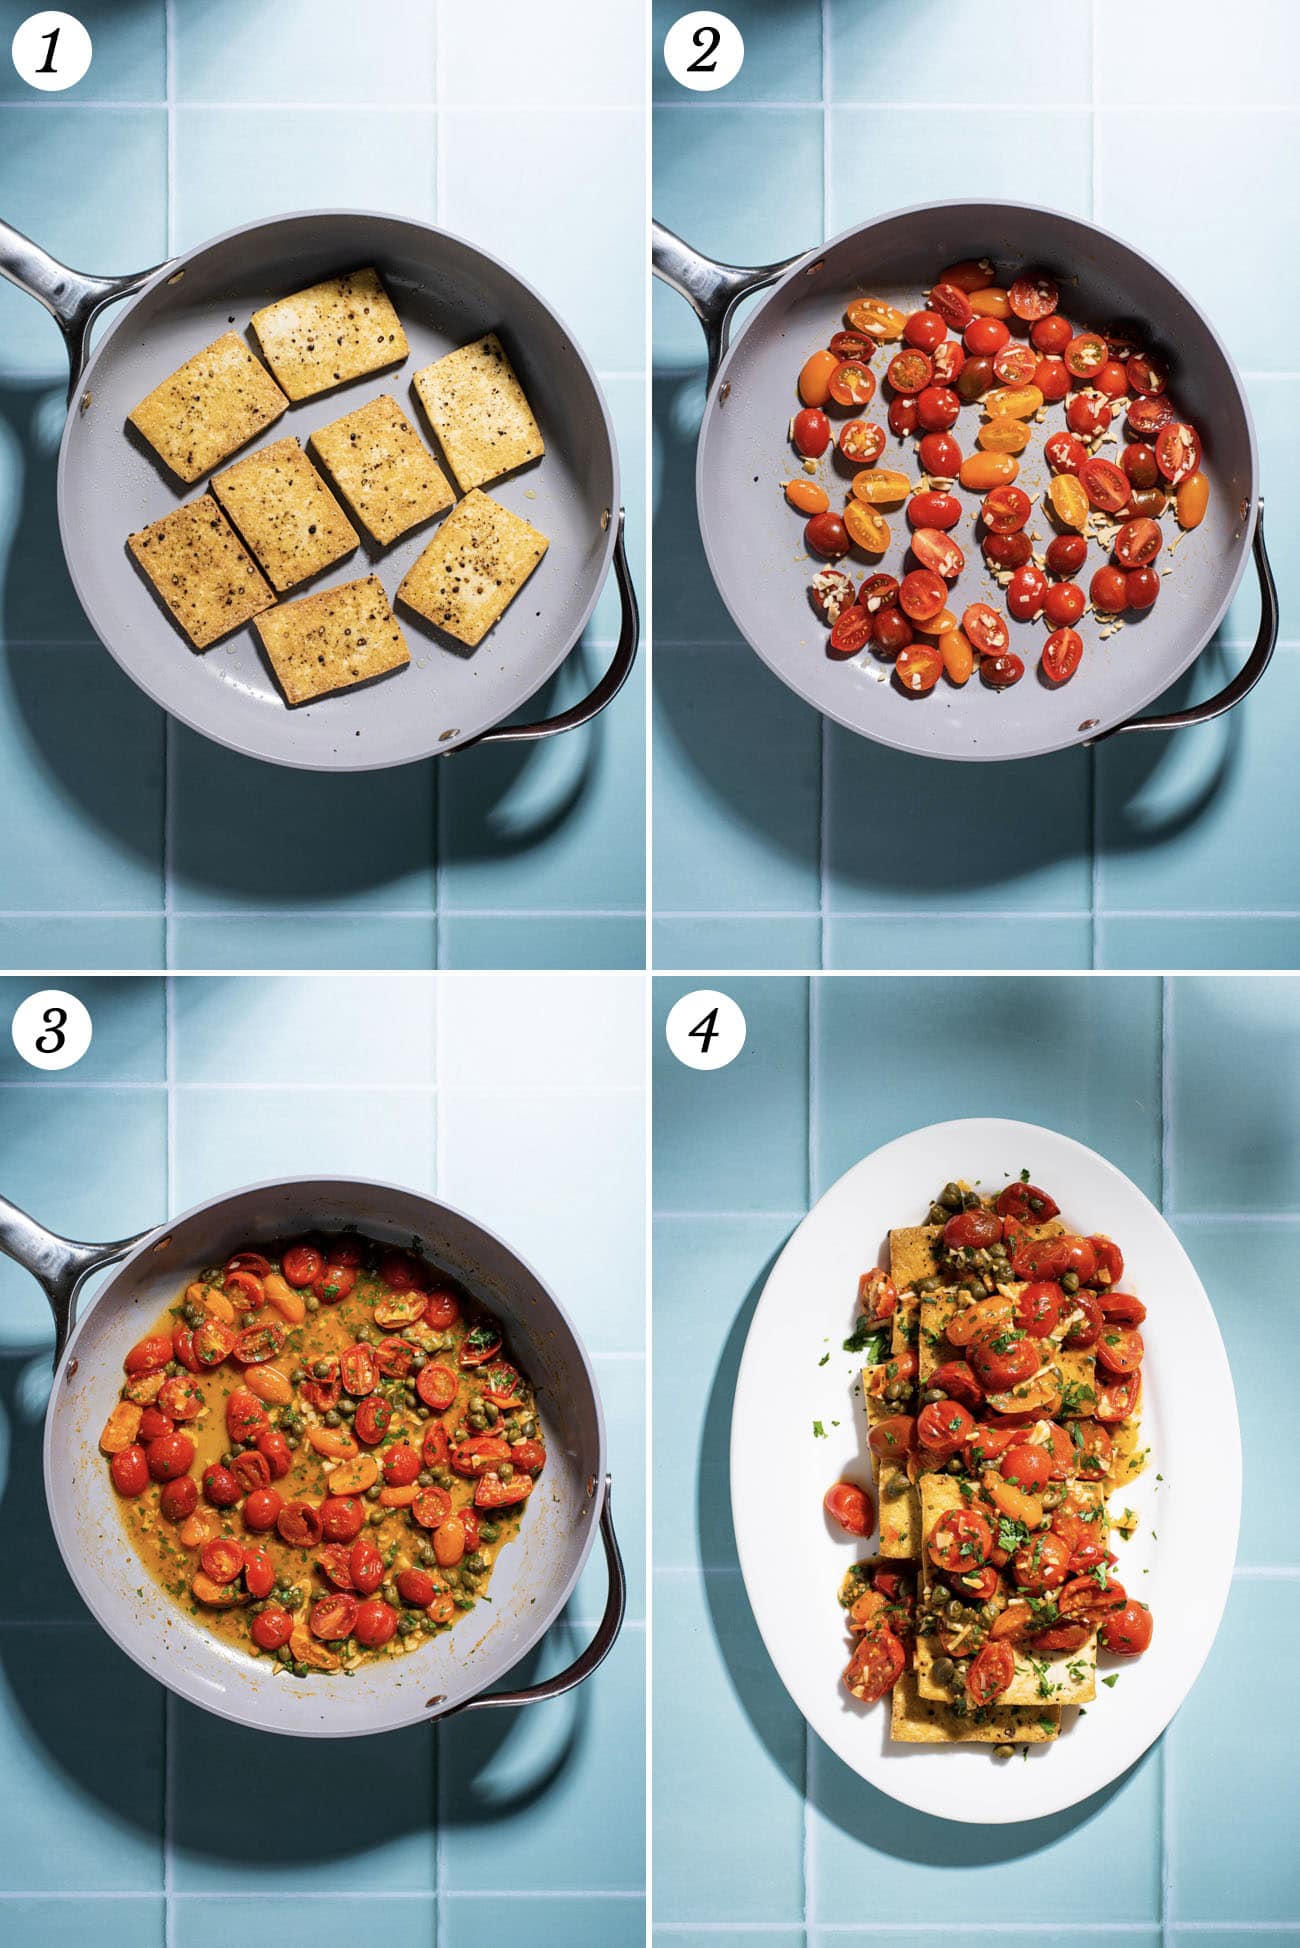 Step-by-step images showing how to make Italian tomato tofu.